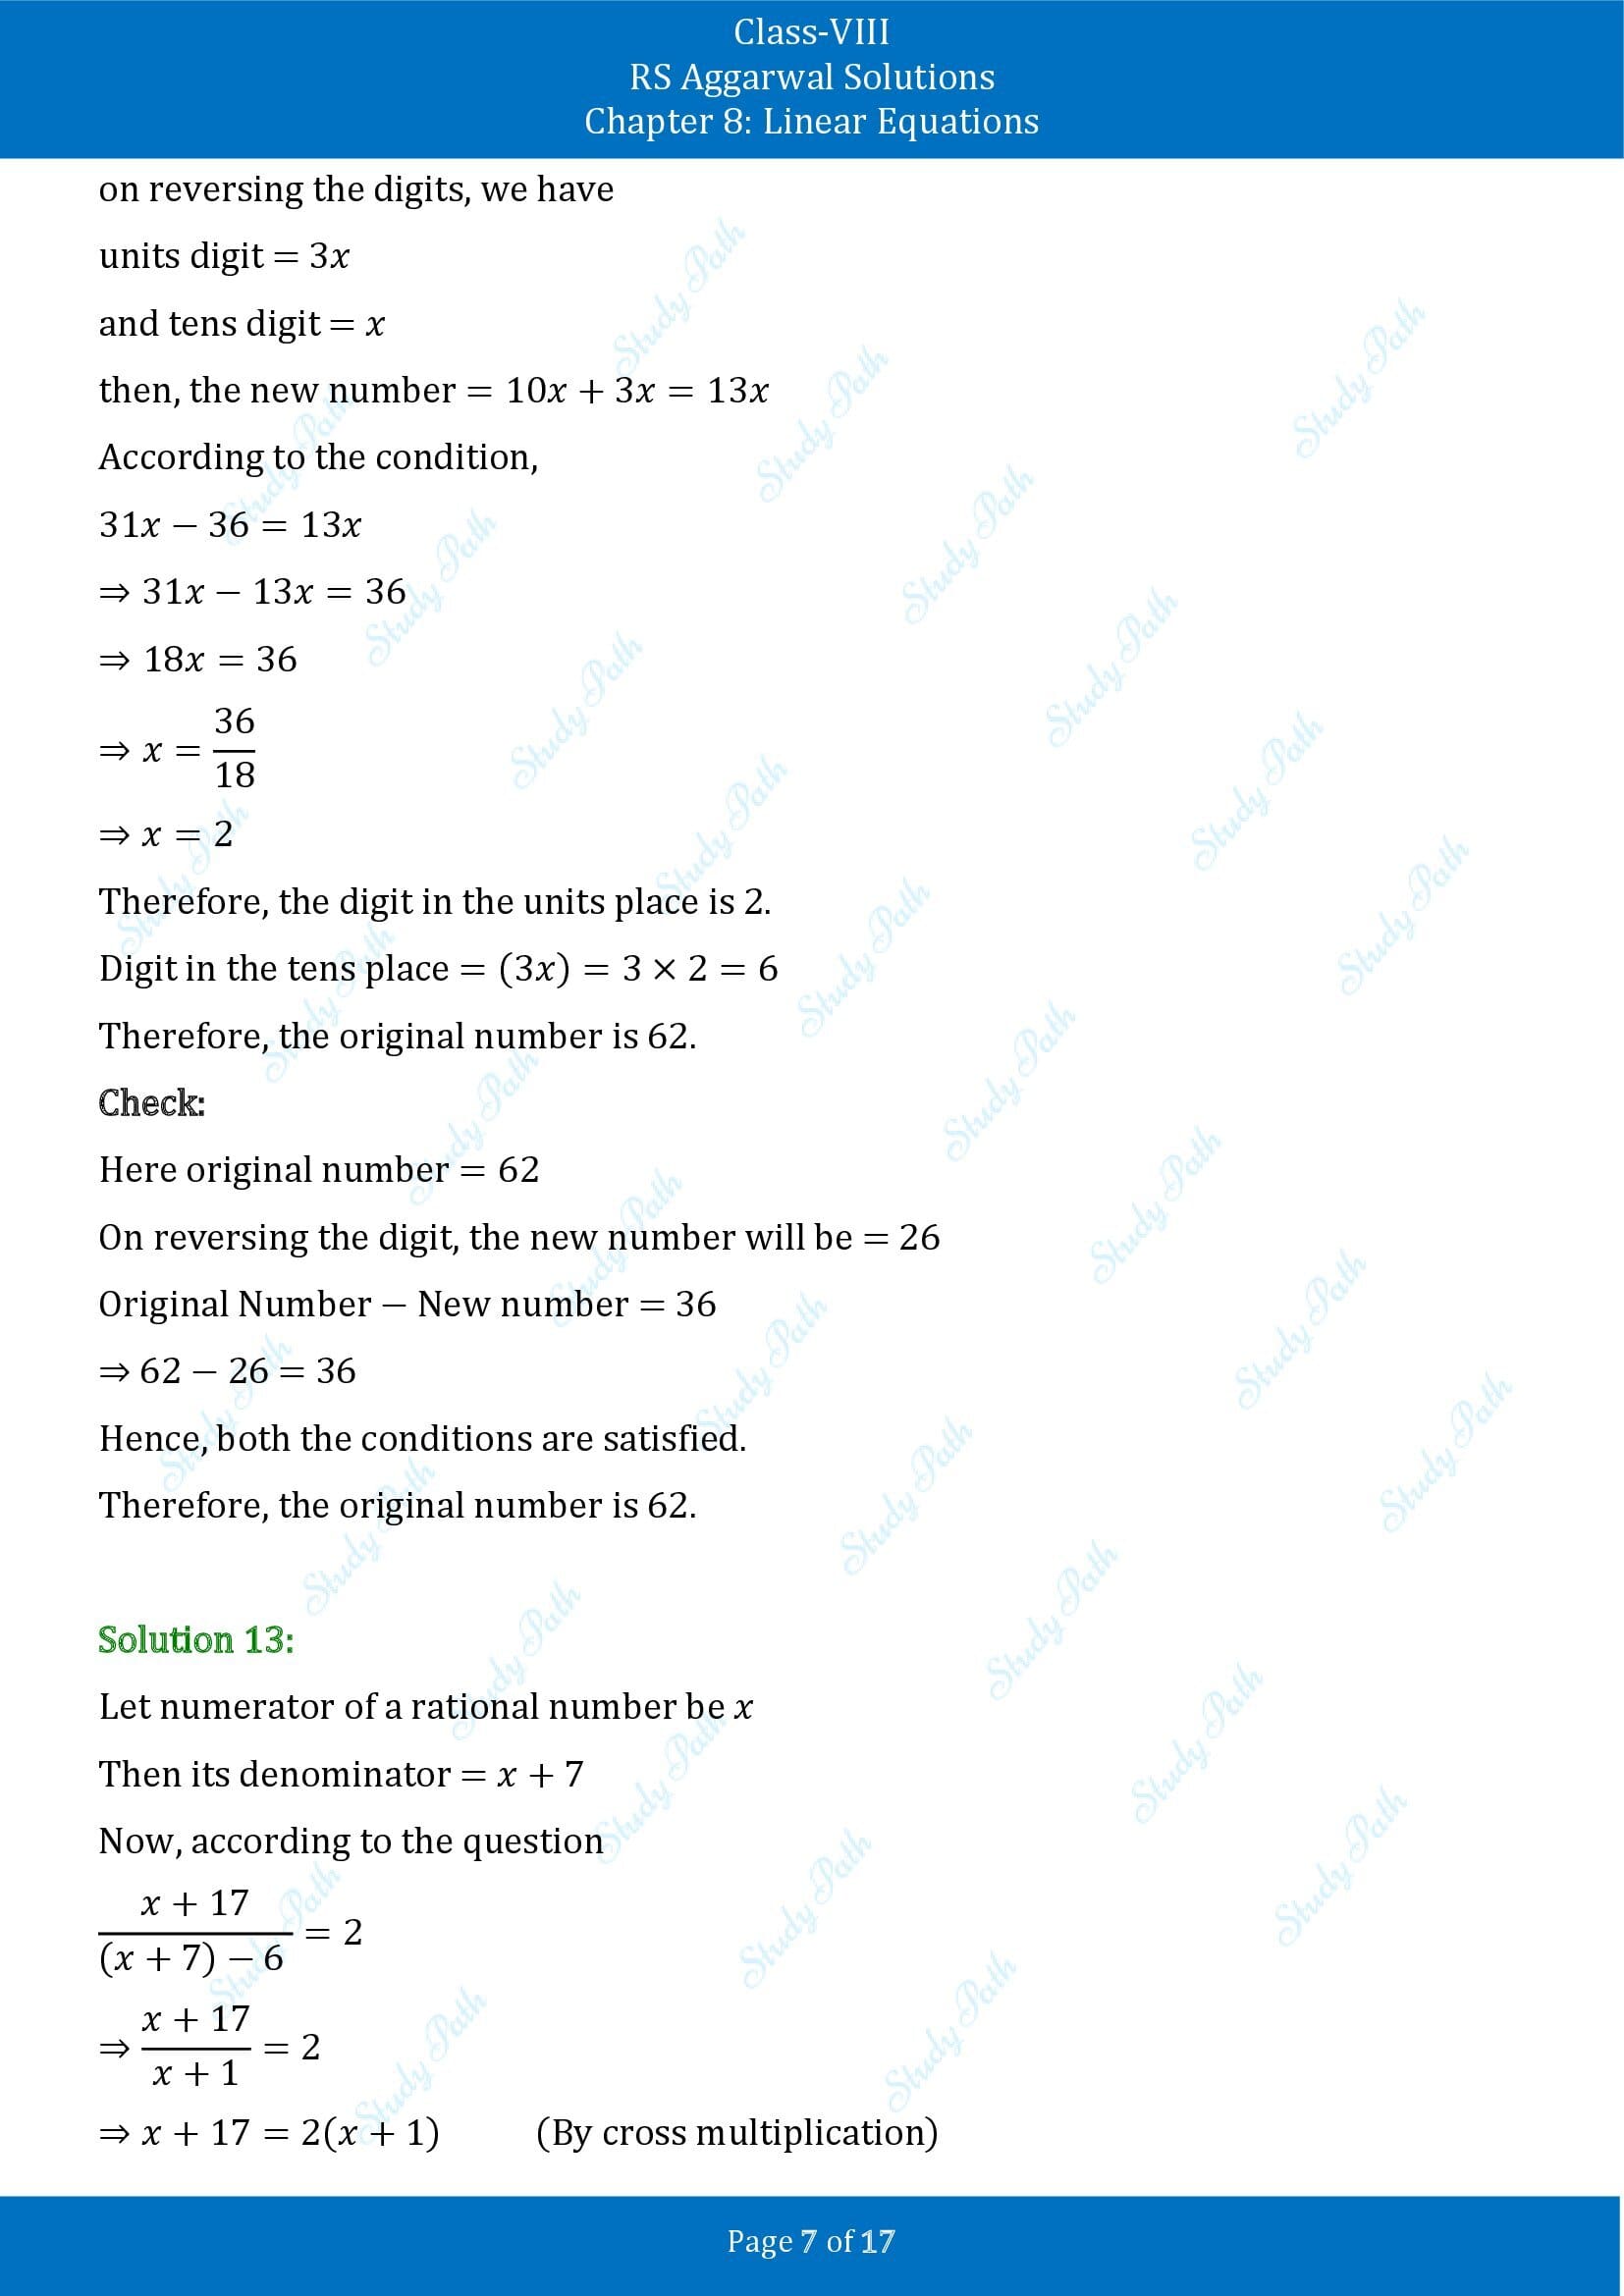 RS Aggarwal Solutions Class 8 Chapter 8 Linear Equations Exercise 8B 00007